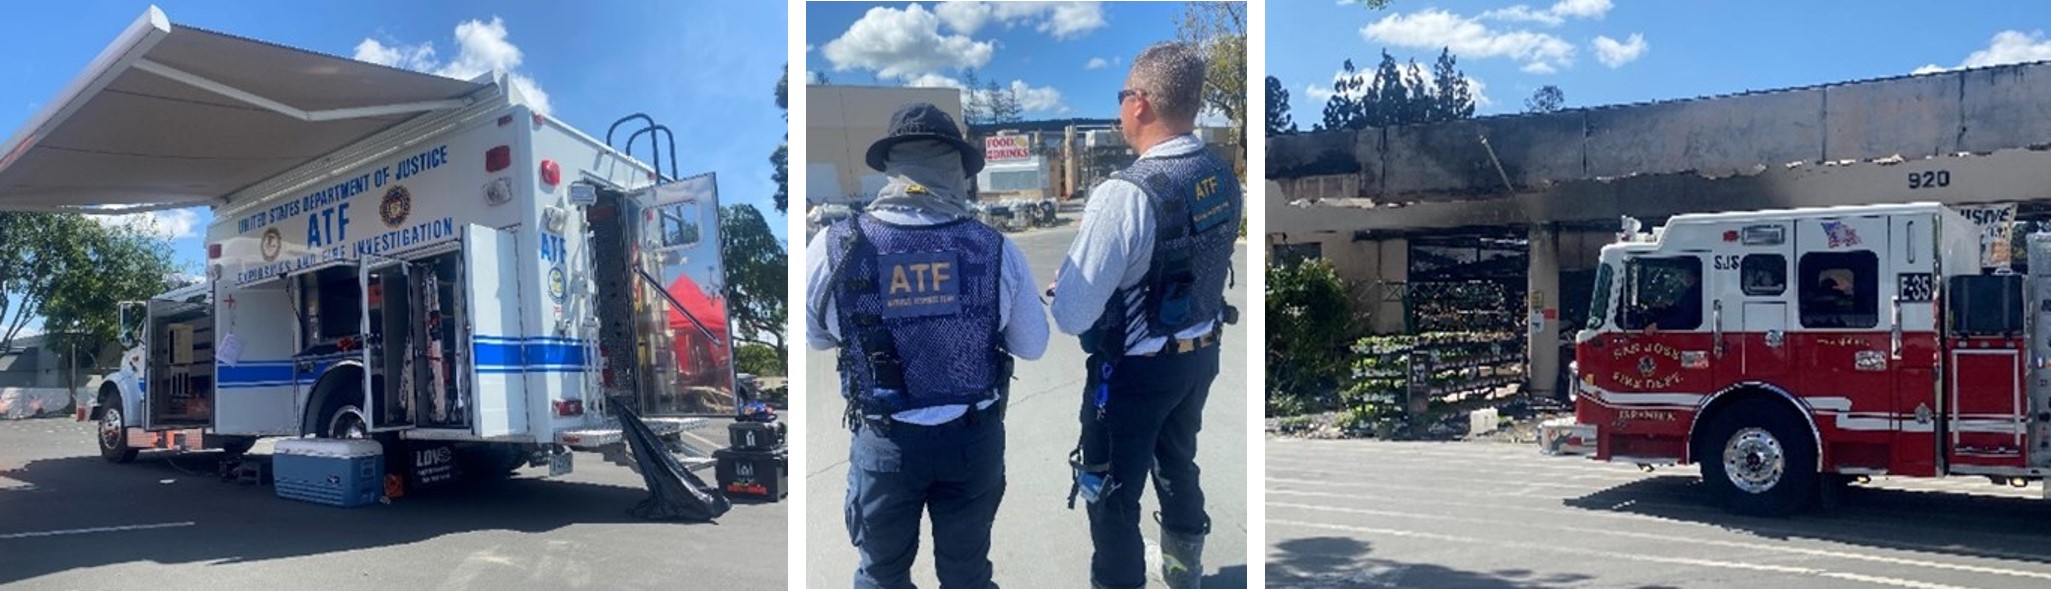 ATF National Response Team (NRT) vehicle (left), two ATF NRT investigators looking at the fire scene (center), and San Jose Fire Department fire truck (right).